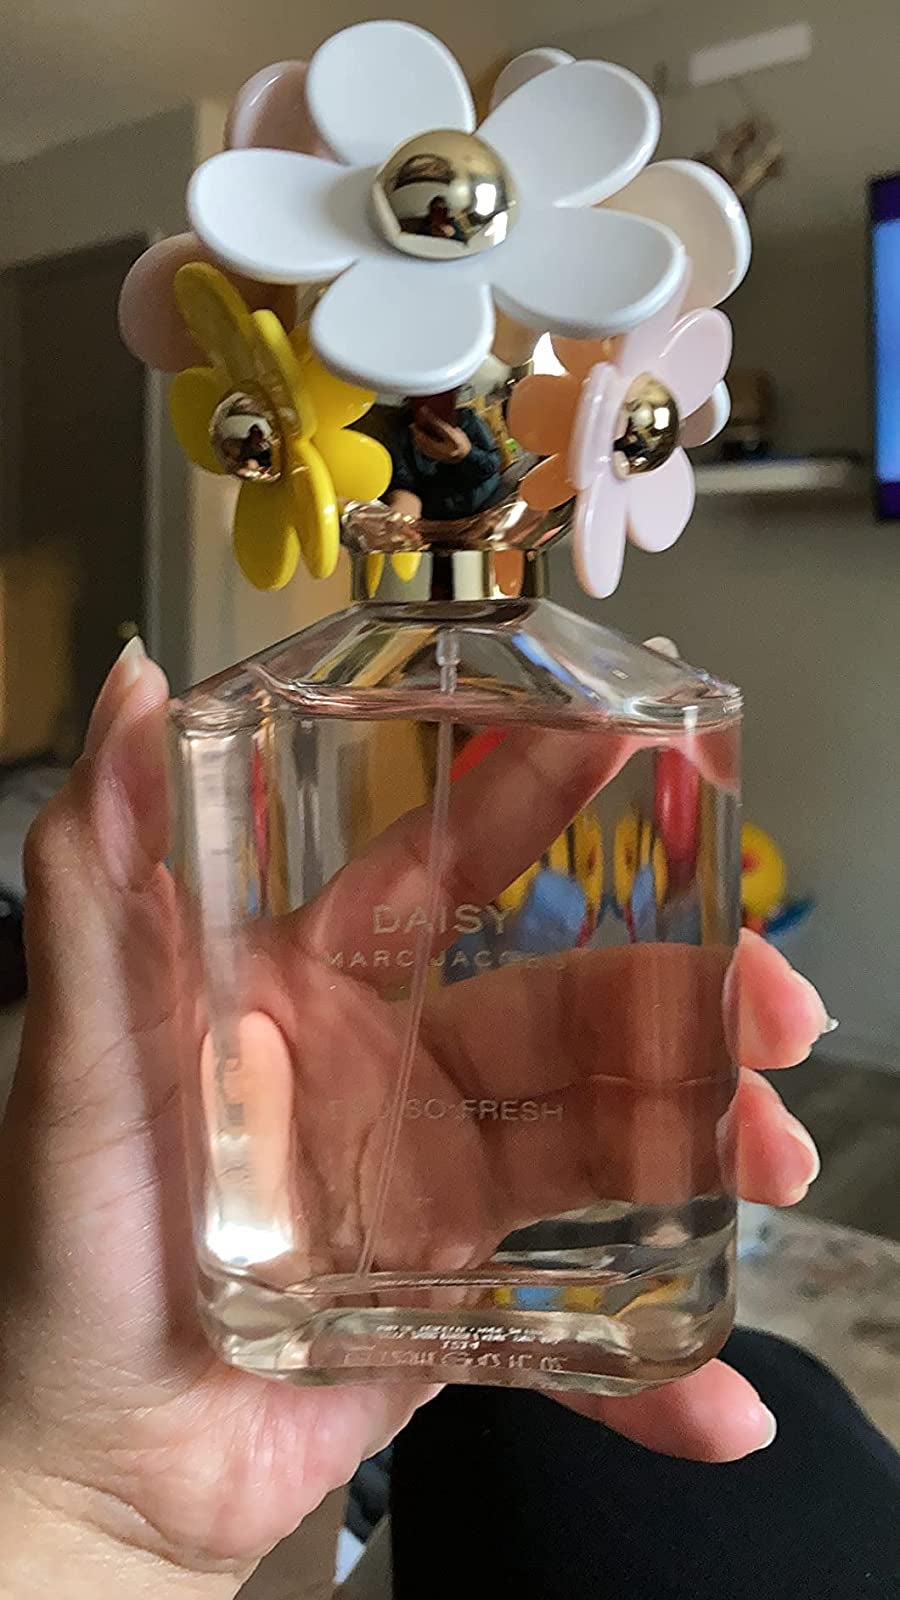 reviewer holding perfume bottle